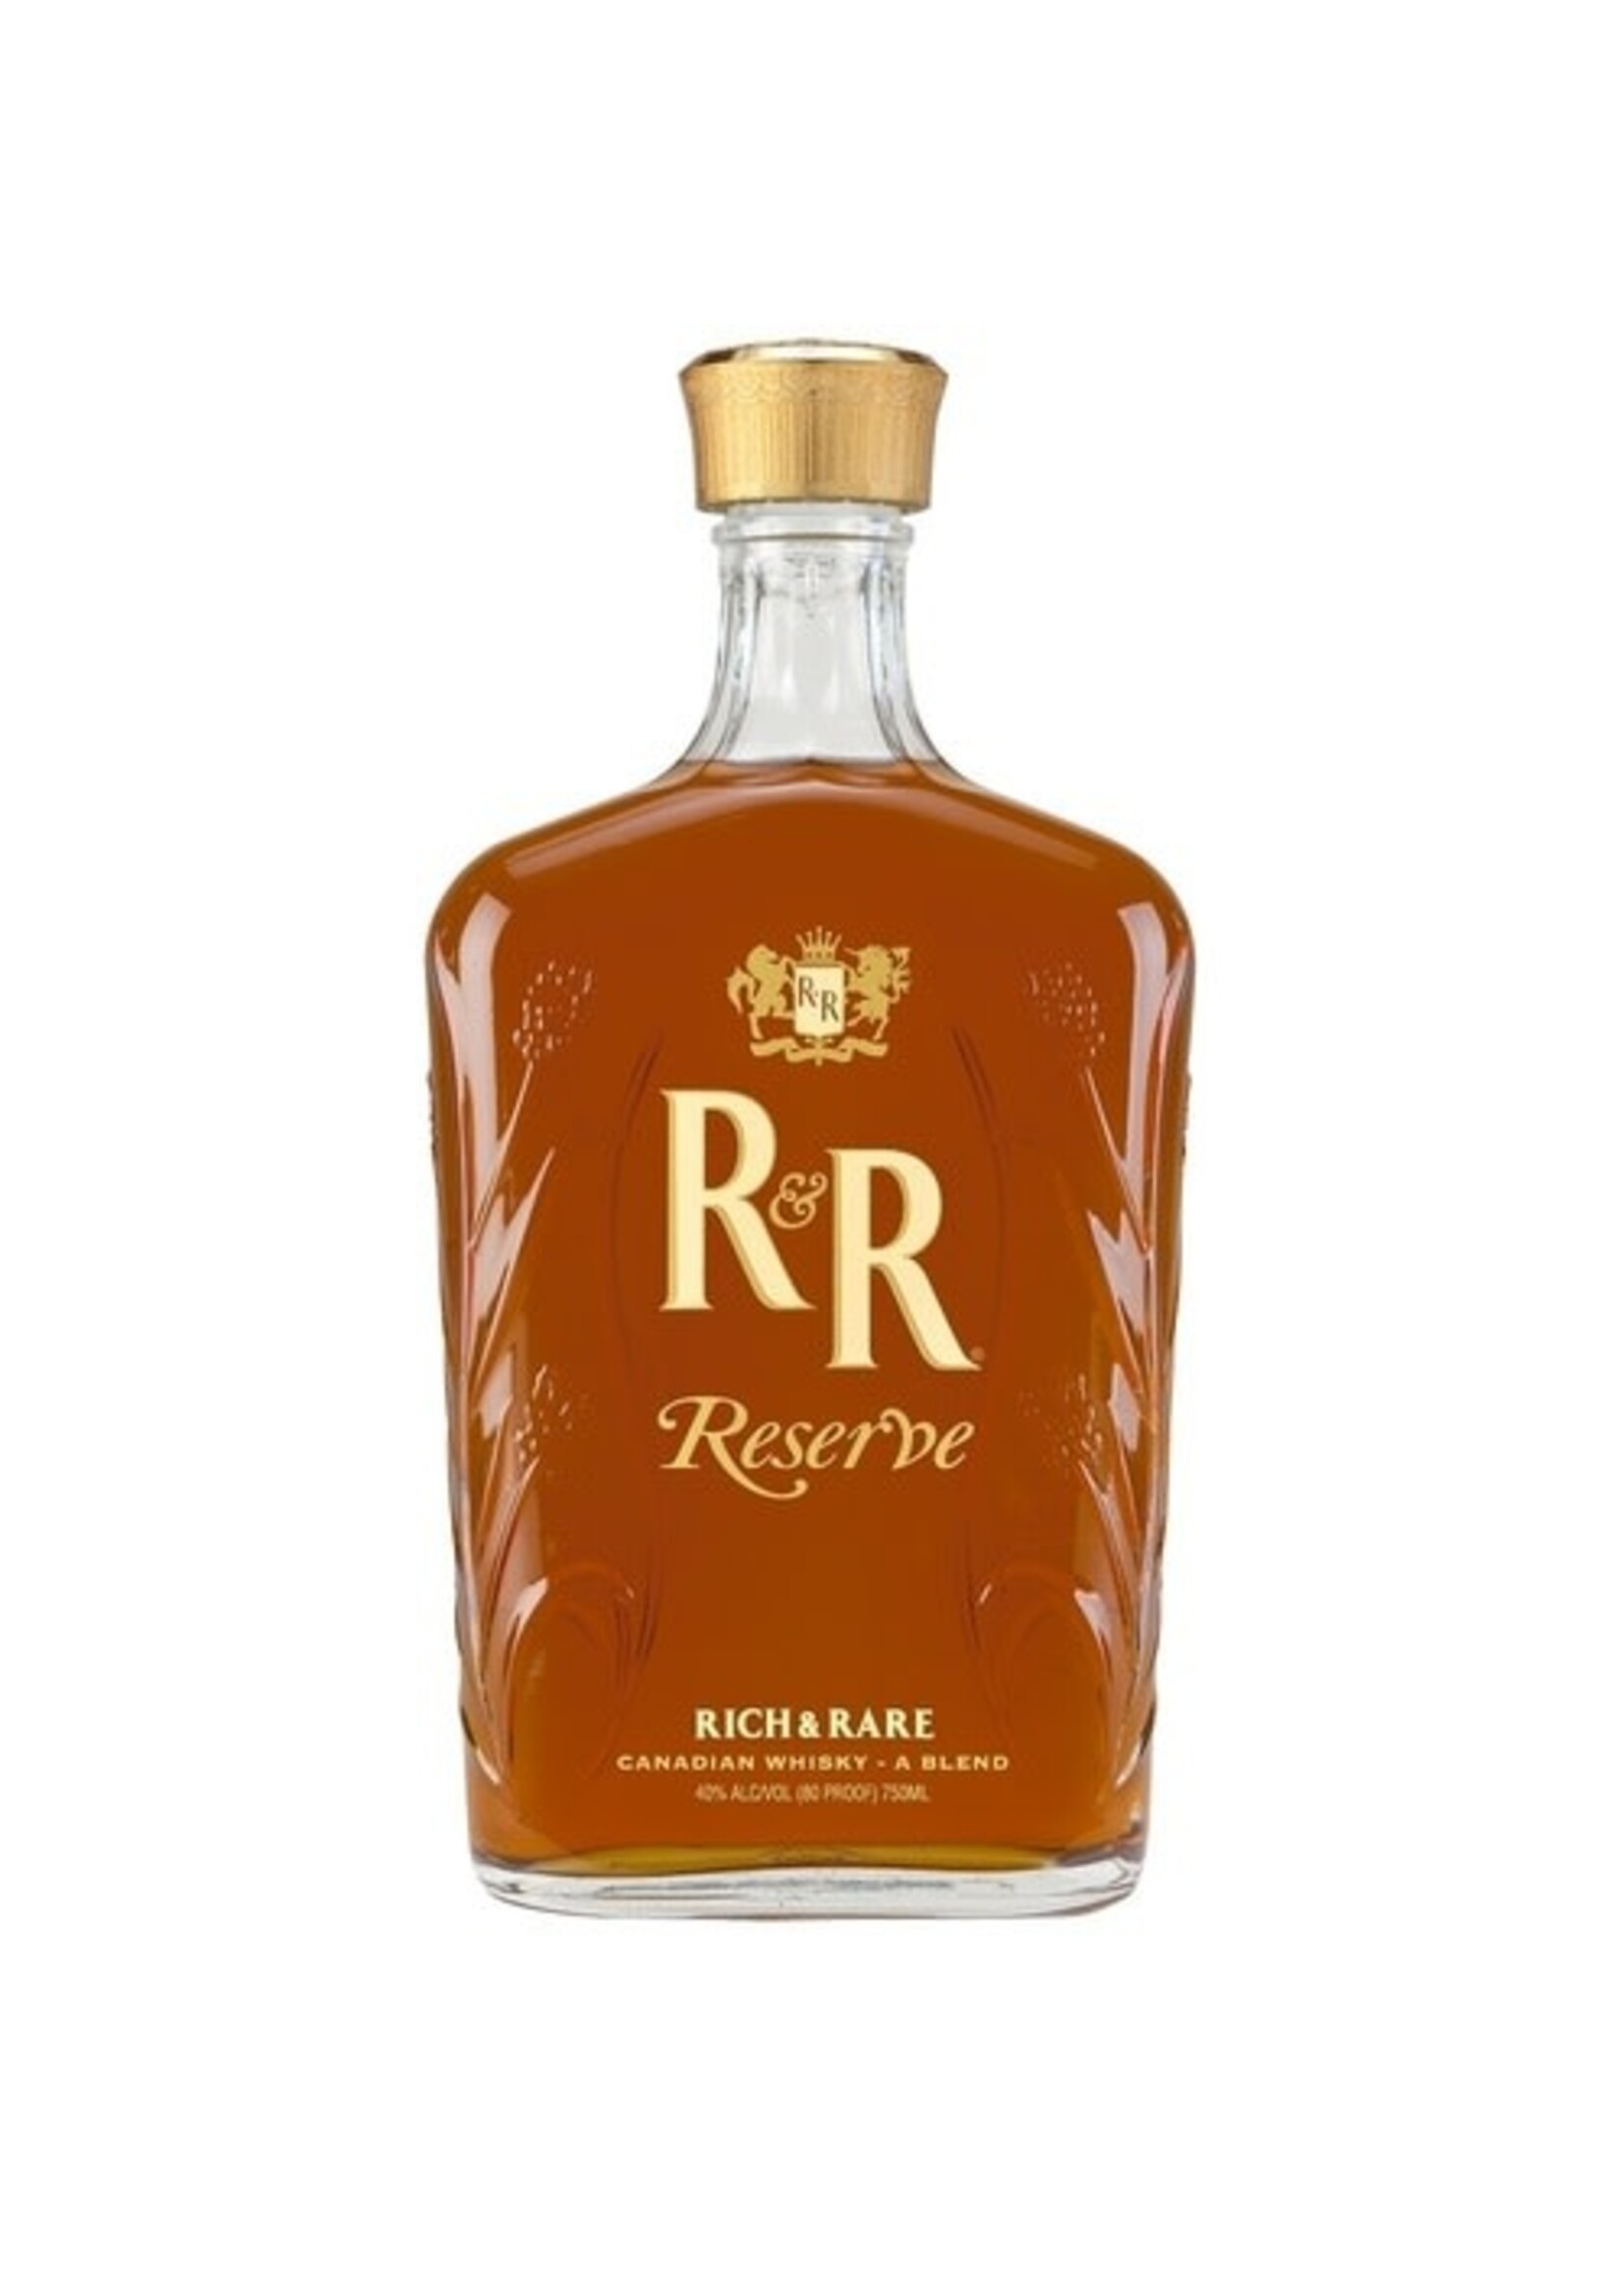 RICH & RARE RESERVE RICH & RARE RESERVE	CANADIAN WHISKY	.750L